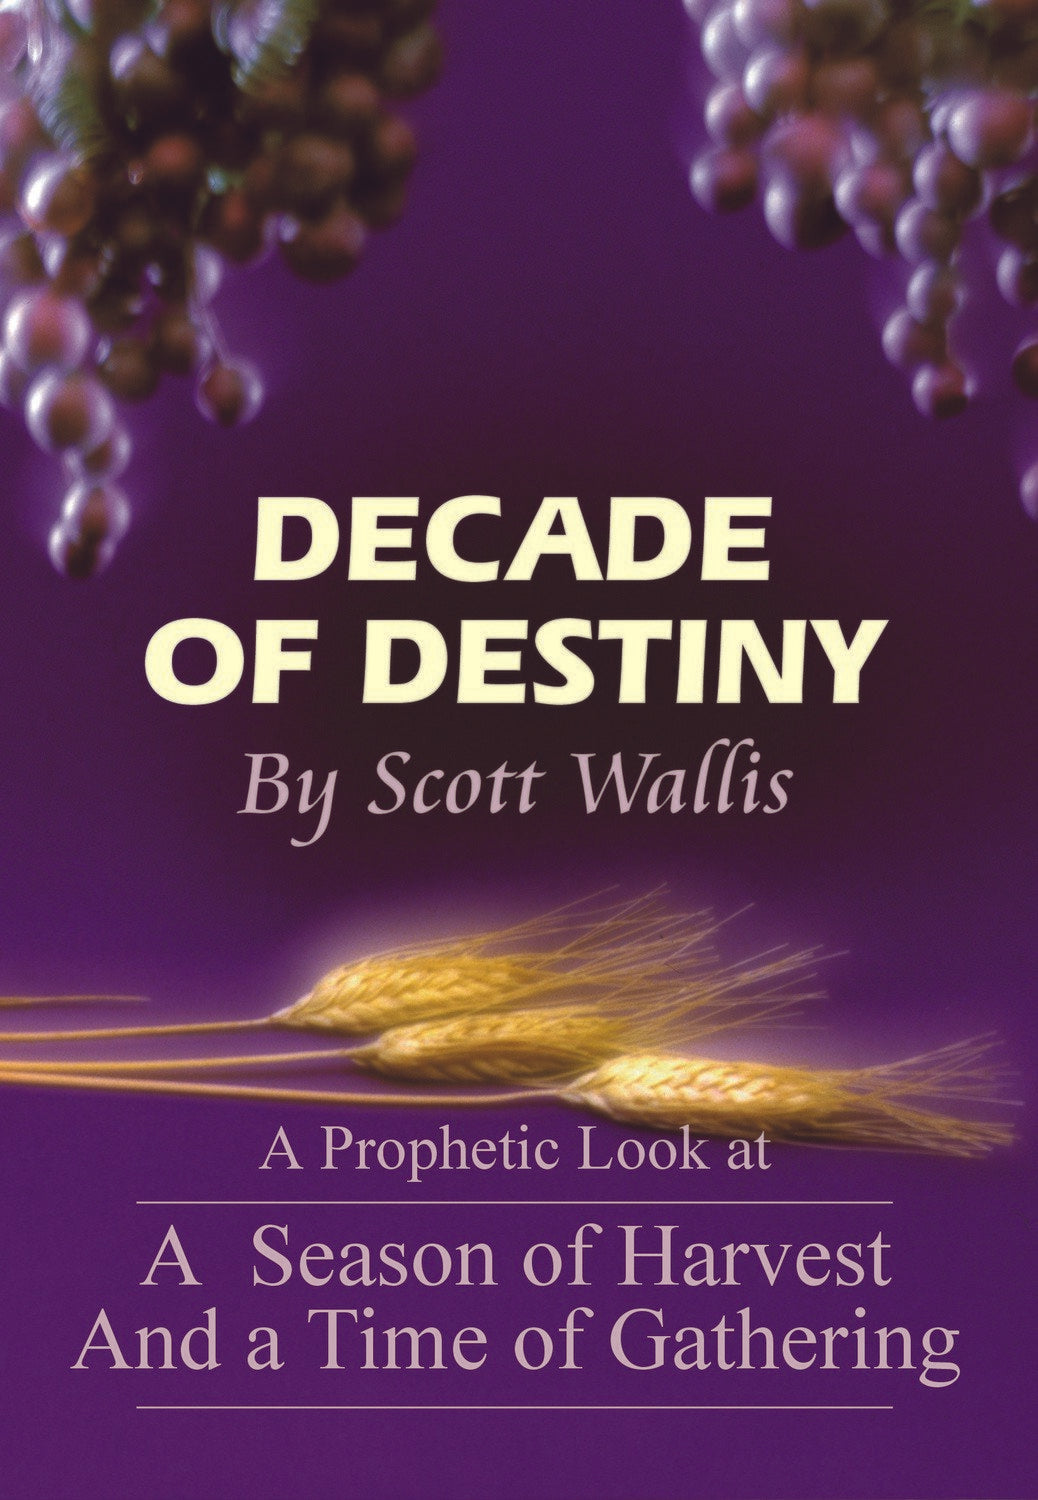 Decade of Destiny: A Season of Harvest and Time of Gathering